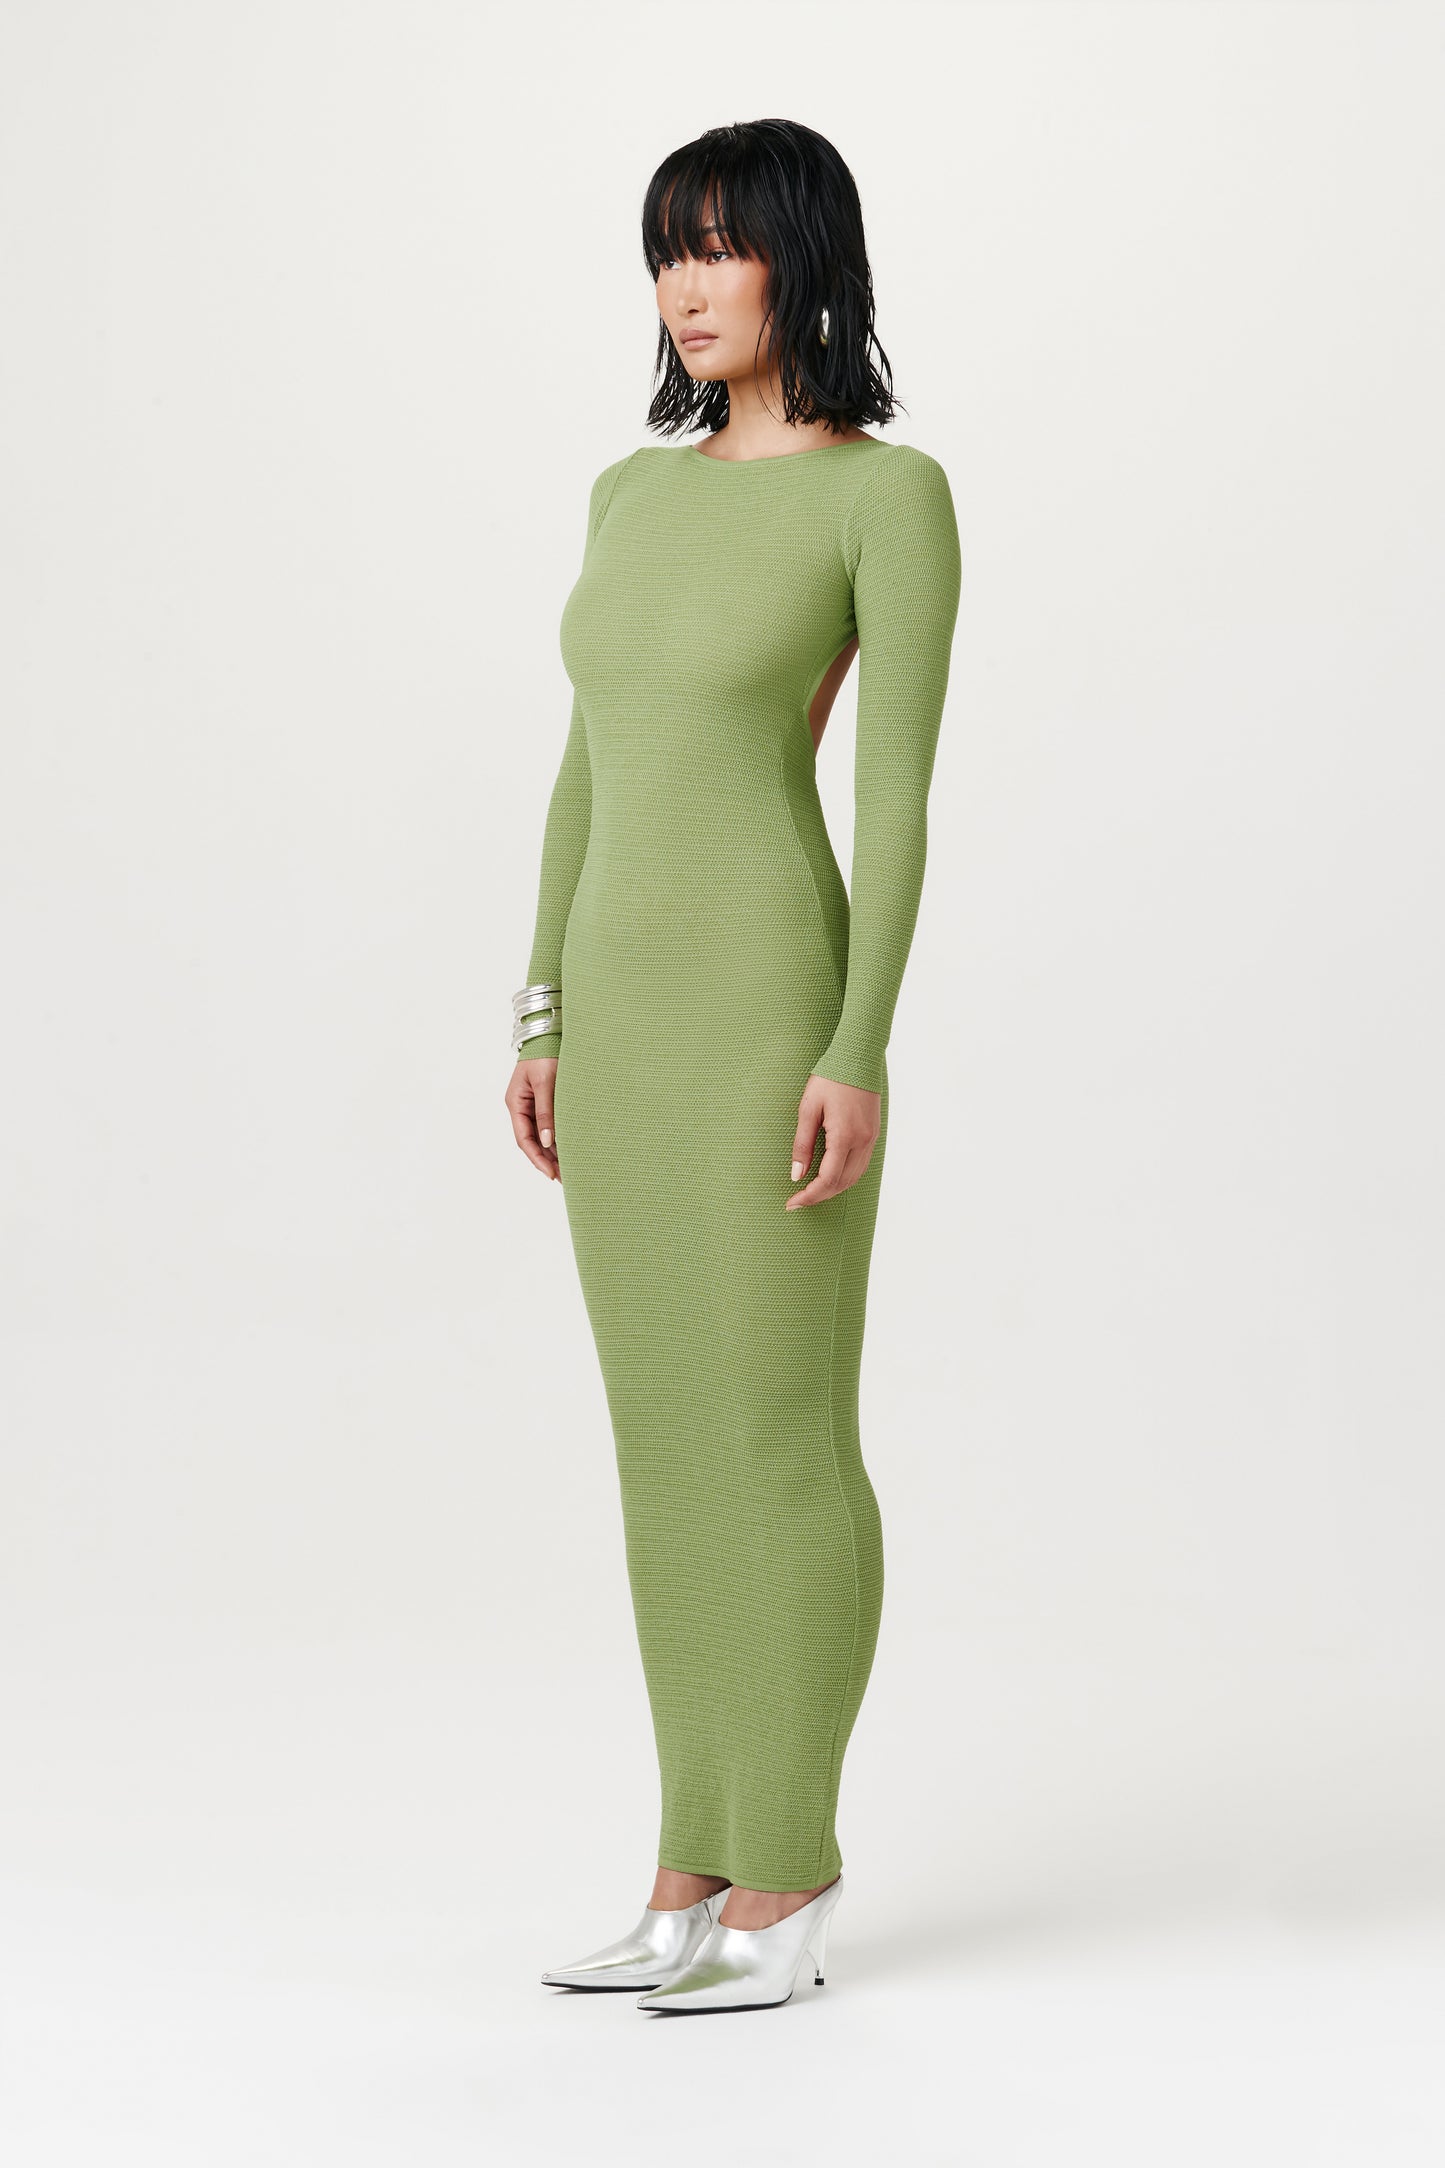 side view of woman wearing lime green long-sleeve maxi dress with silver heels